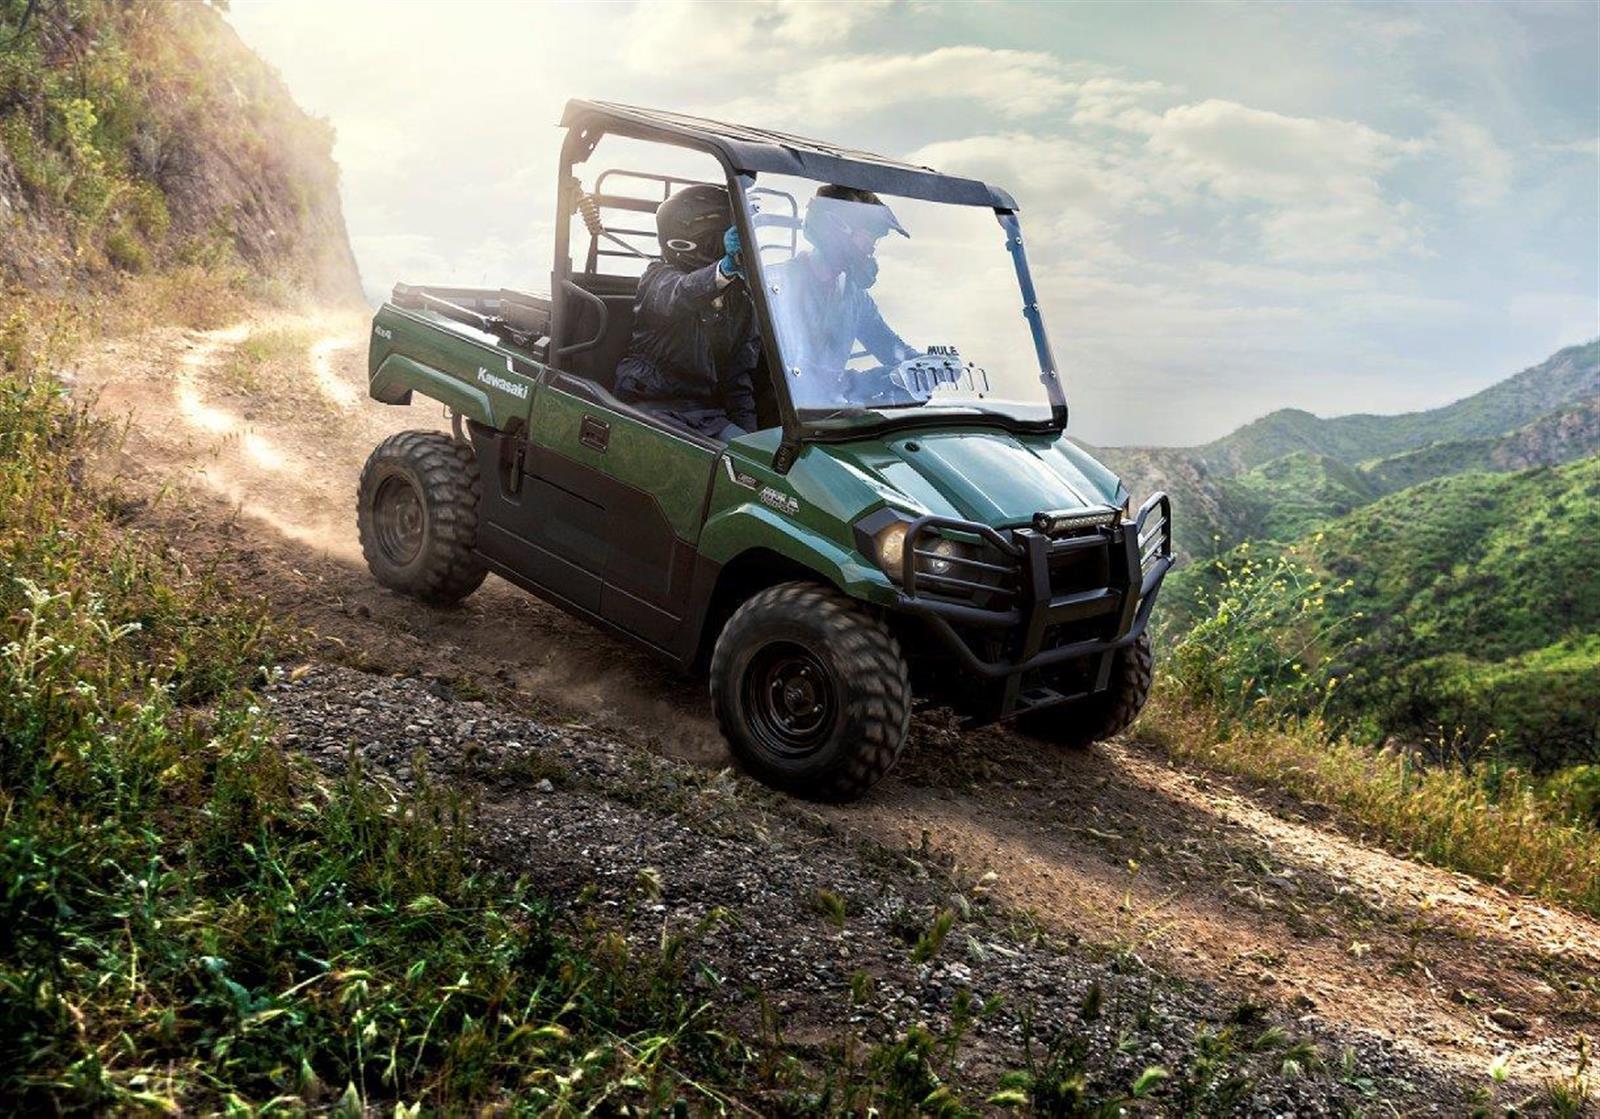 Kawasaki announce complete 2022 MULE and ATV line up